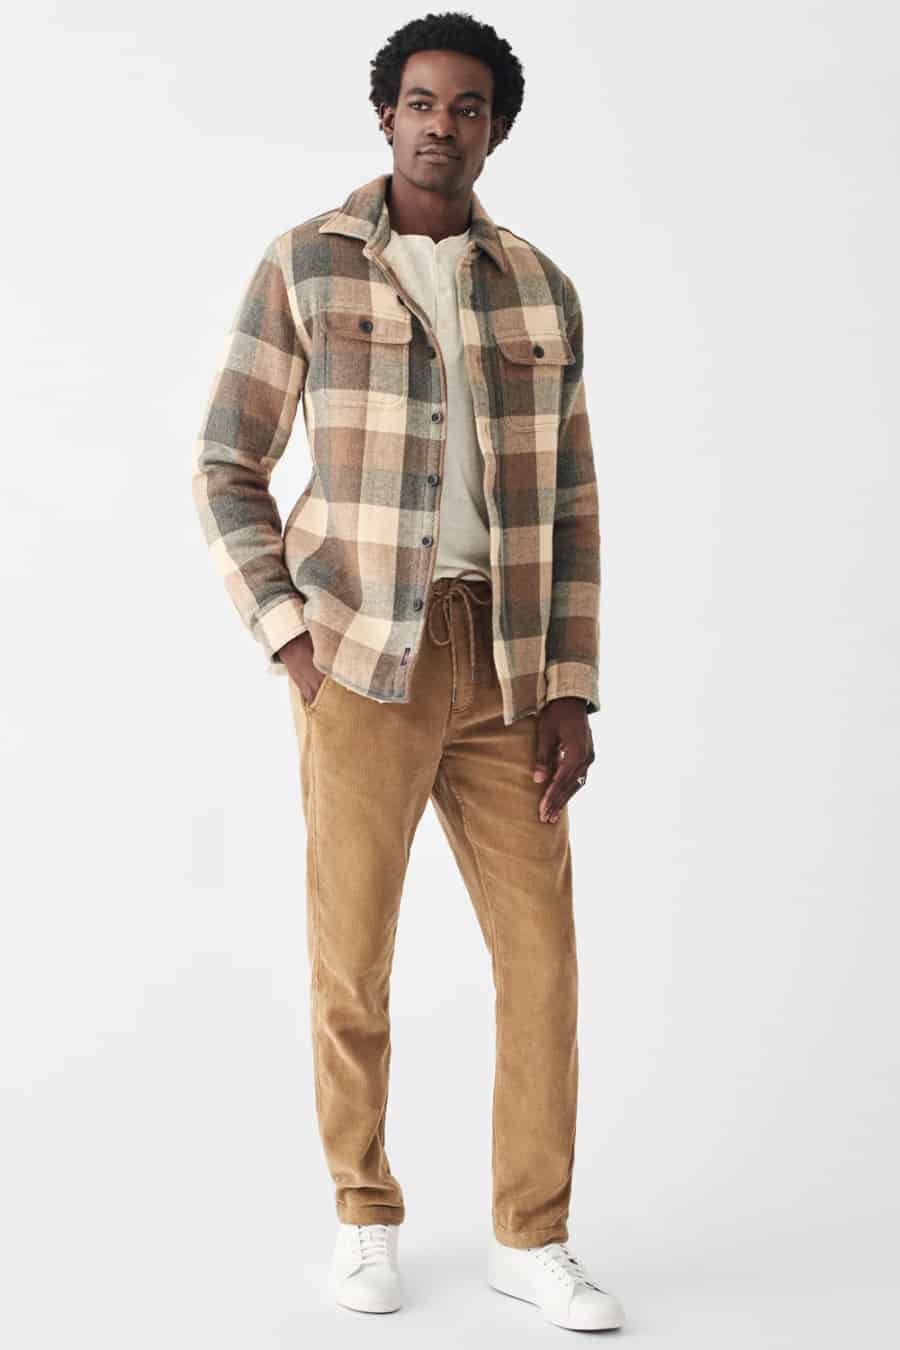 Men's corduroy trousers, white Henley shirt, checked flannel overshirt and white sneakers outfit